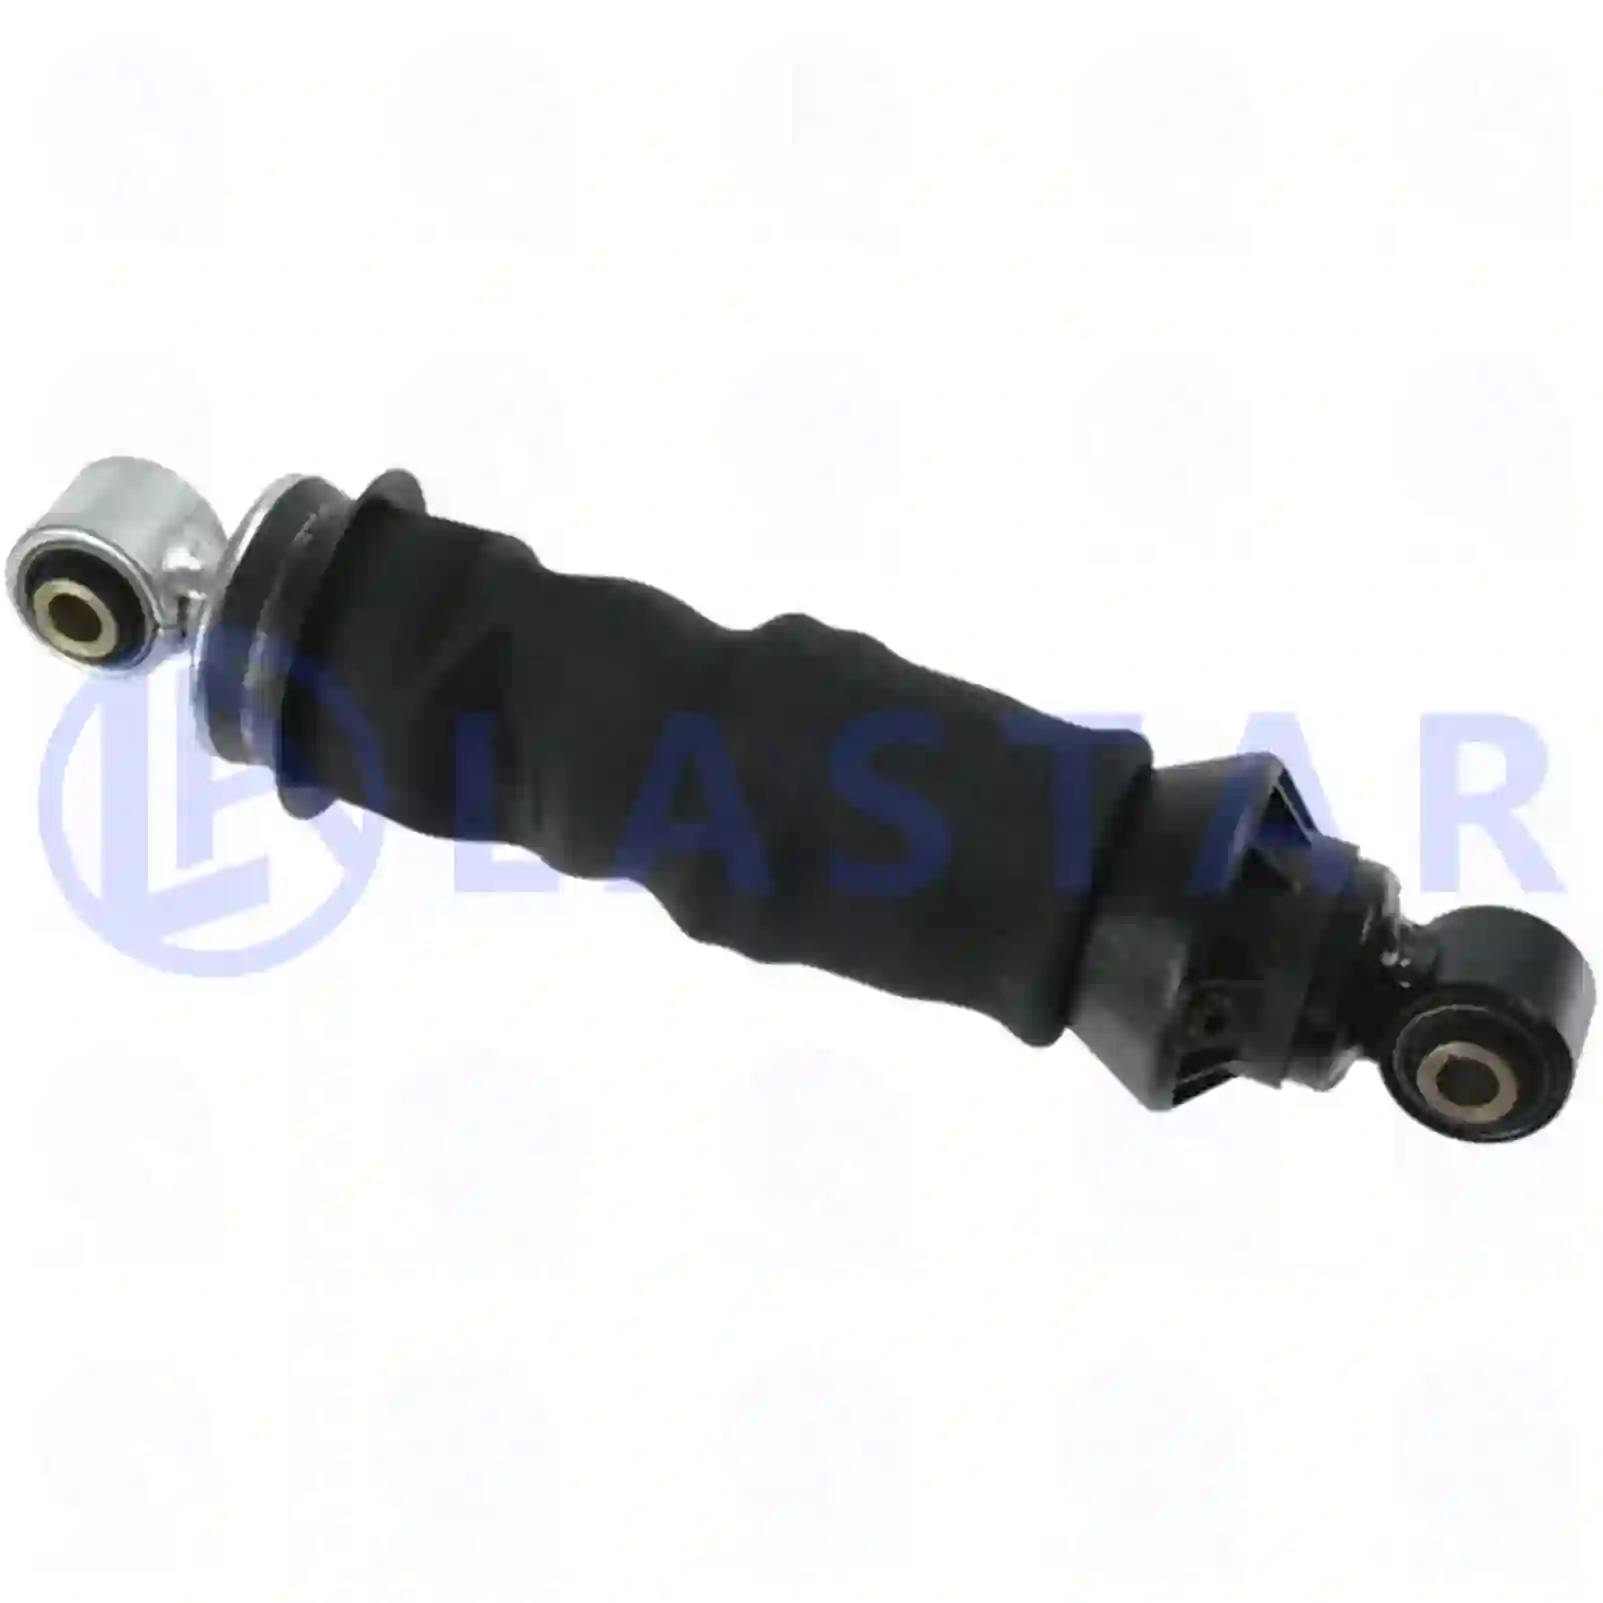 Cabin shock absorber, with air bellow, 77735188, 5010228908, 5010269674, 5010288908, 5010316783, 5010629398, 20757841, ZG41220-0008 ||  77735188 Lastar Spare Part | Truck Spare Parts, Auotomotive Spare Parts Cabin shock absorber, with air bellow, 77735188, 5010228908, 5010269674, 5010288908, 5010316783, 5010629398, 20757841, ZG41220-0008 ||  77735188 Lastar Spare Part | Truck Spare Parts, Auotomotive Spare Parts